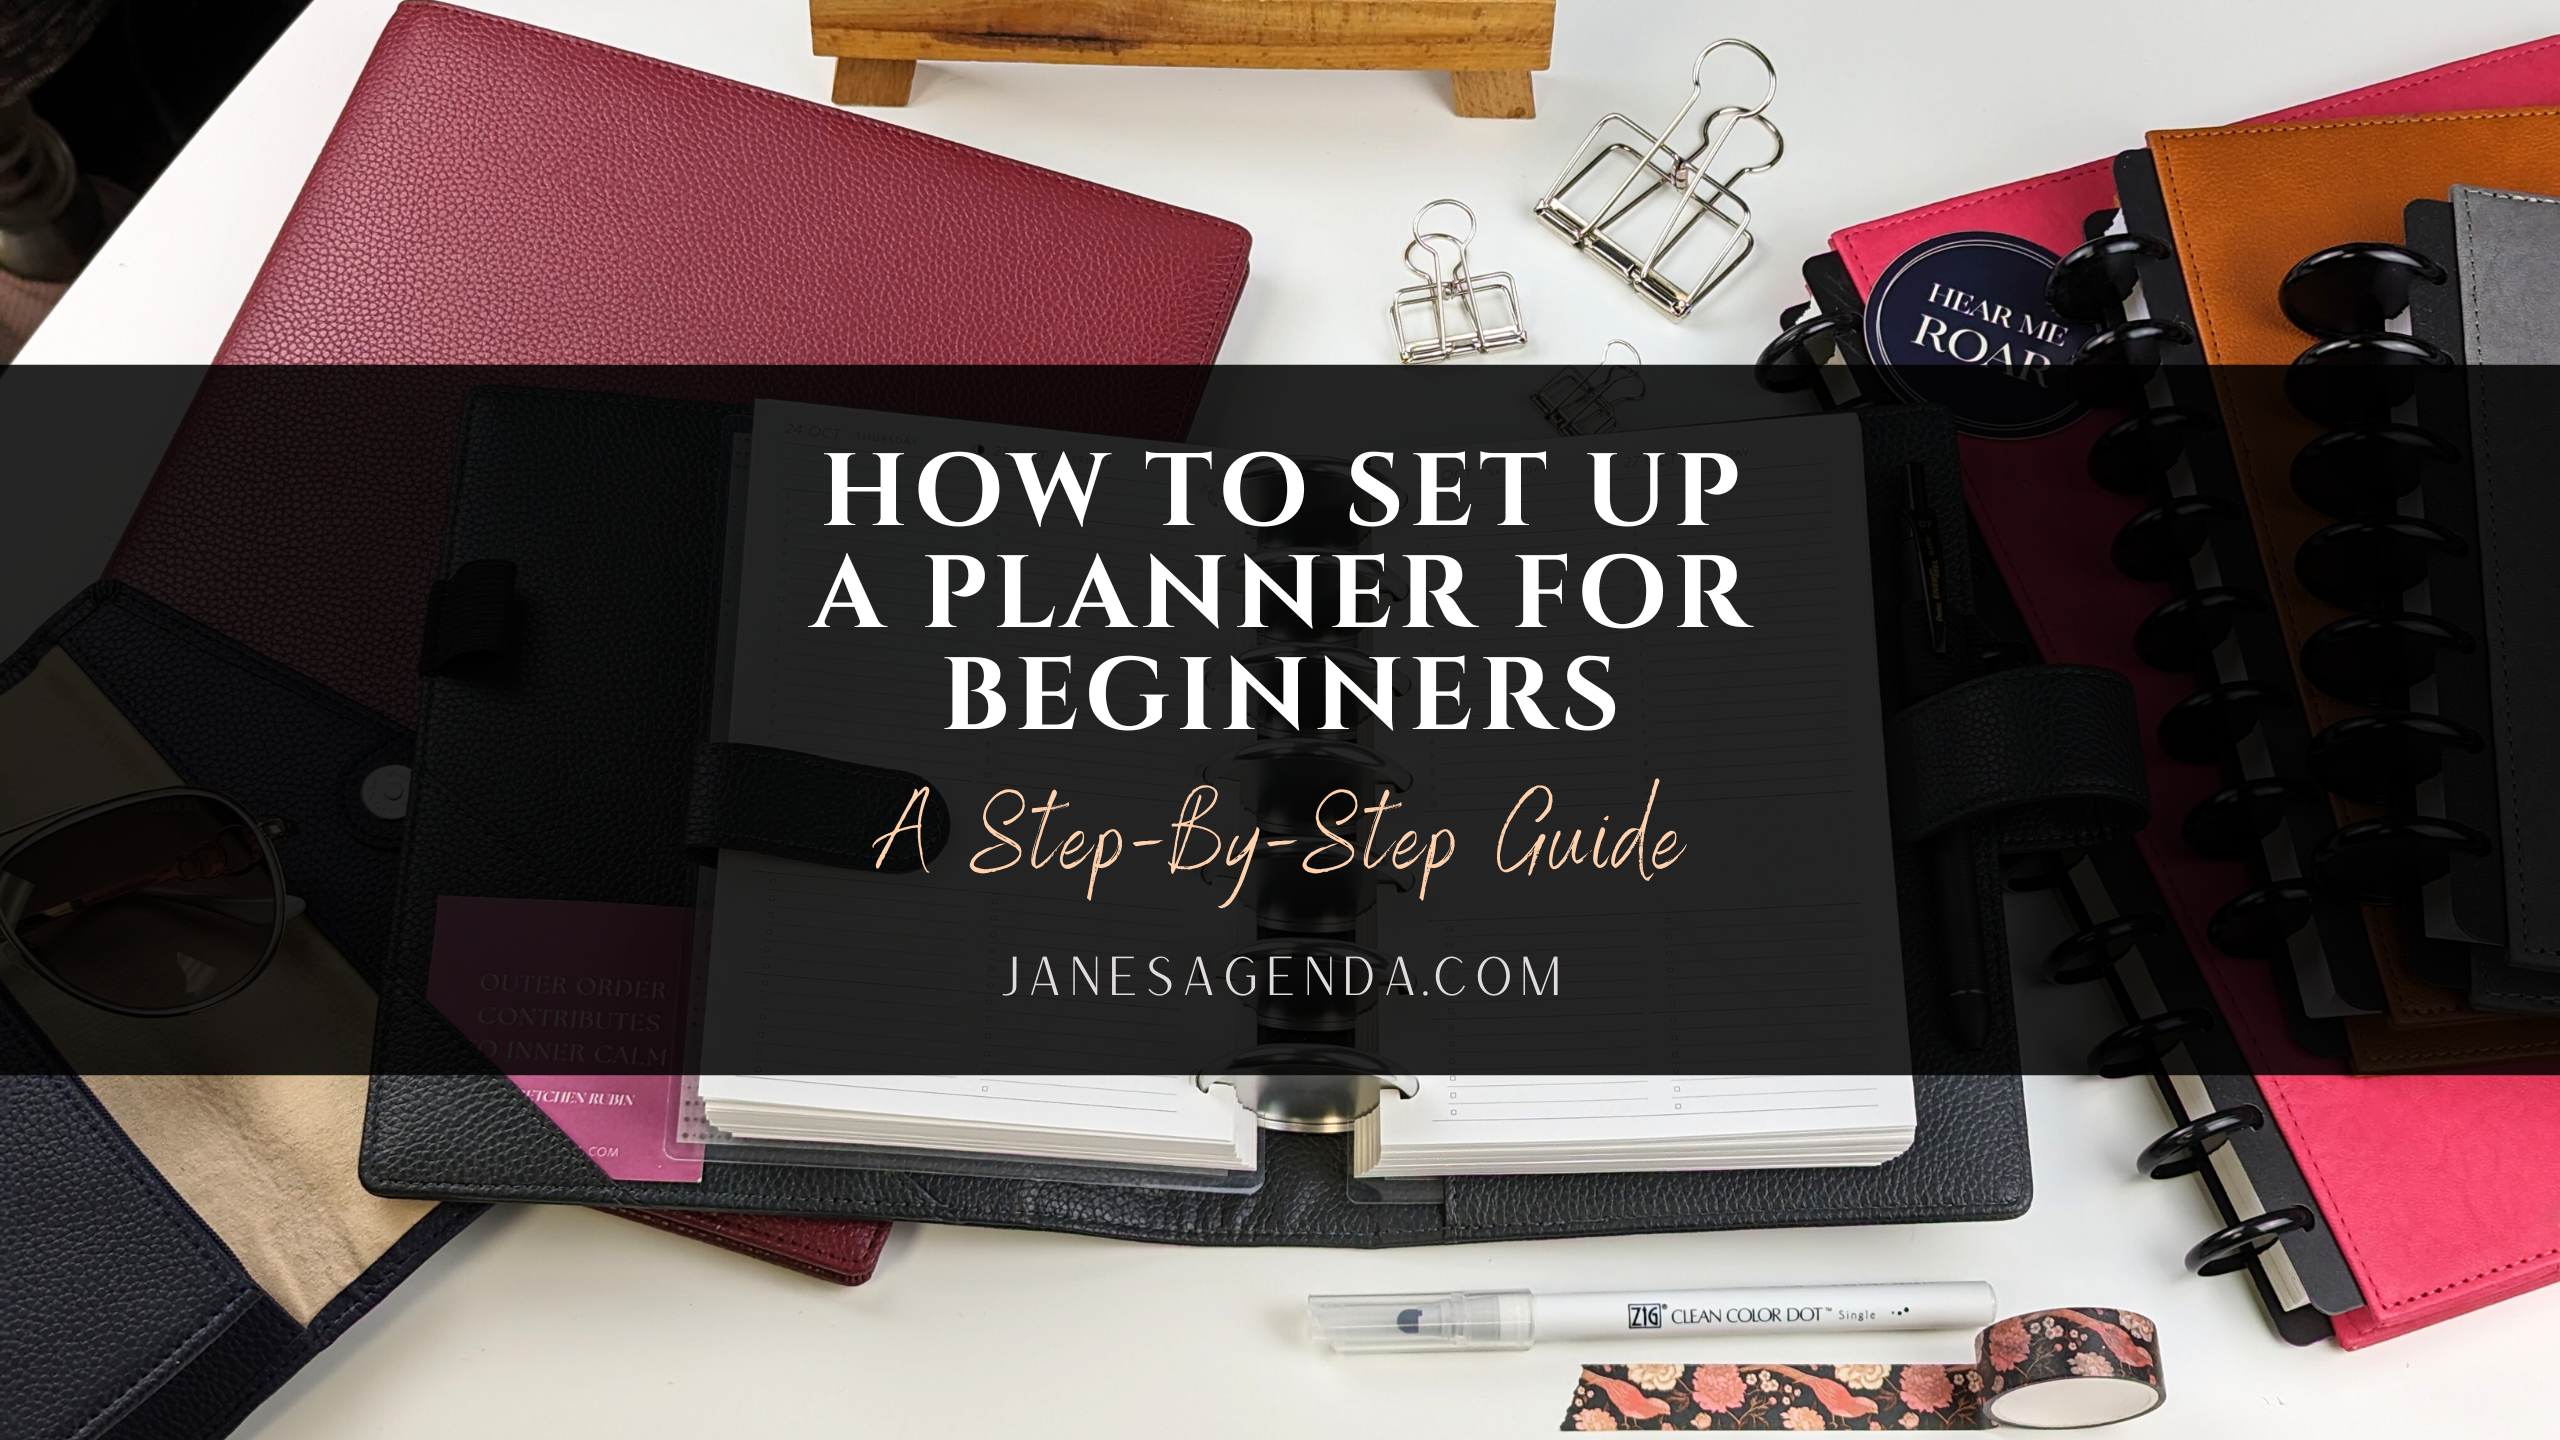 How to Set Up a Planner for Beginners: Step-by-Step Guide